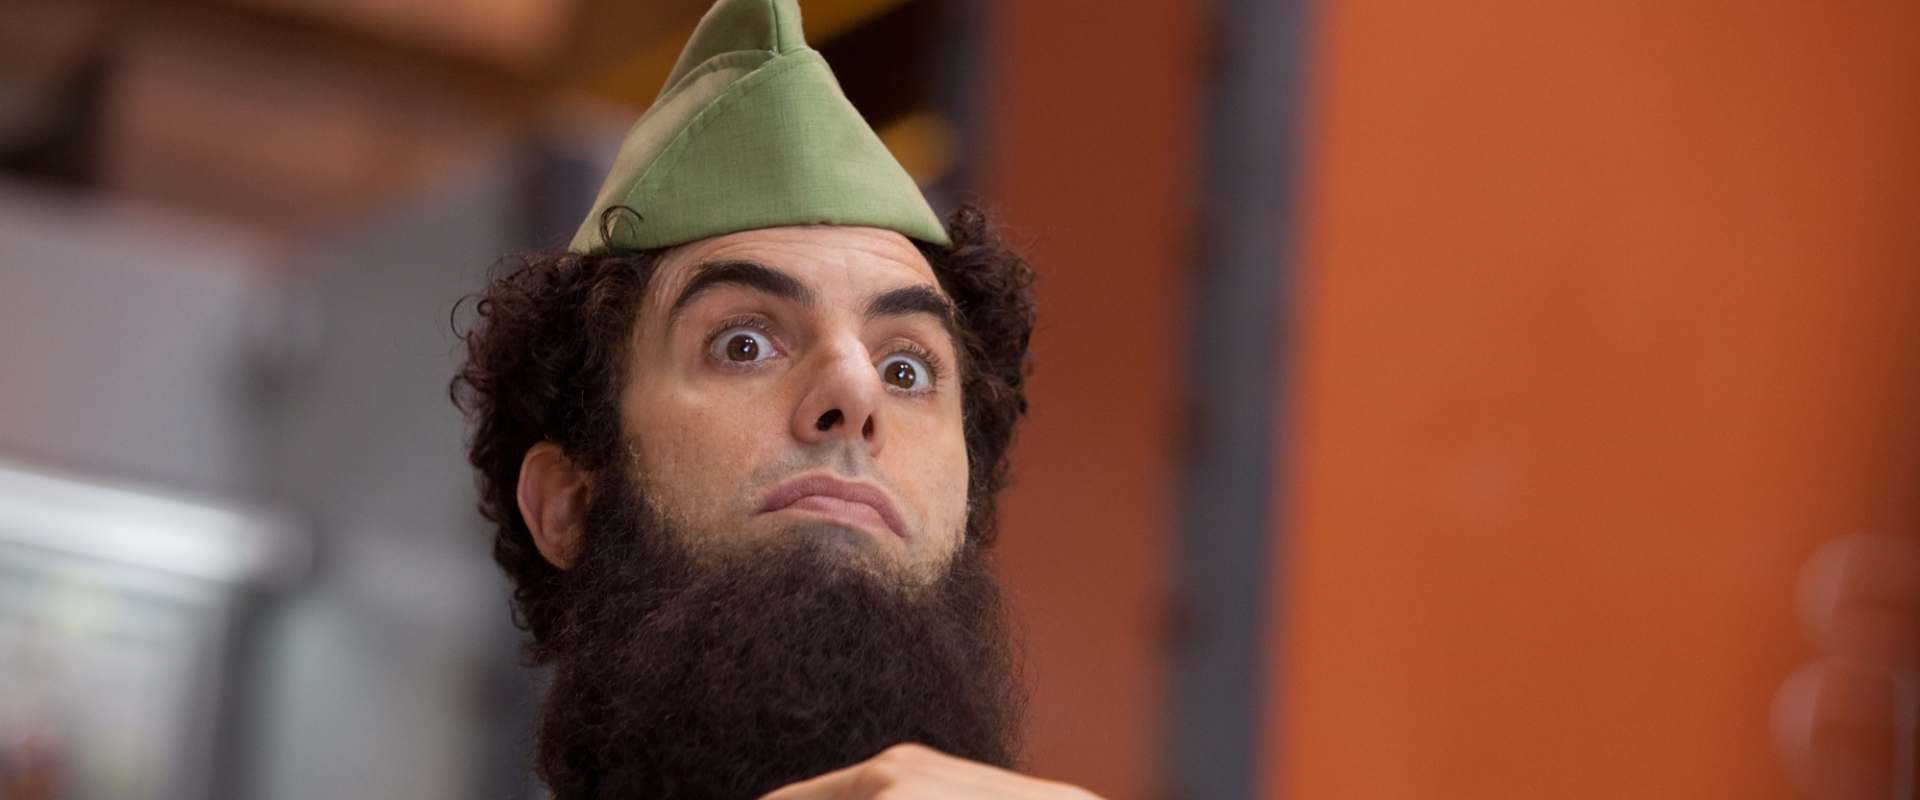 The Dictator background 1